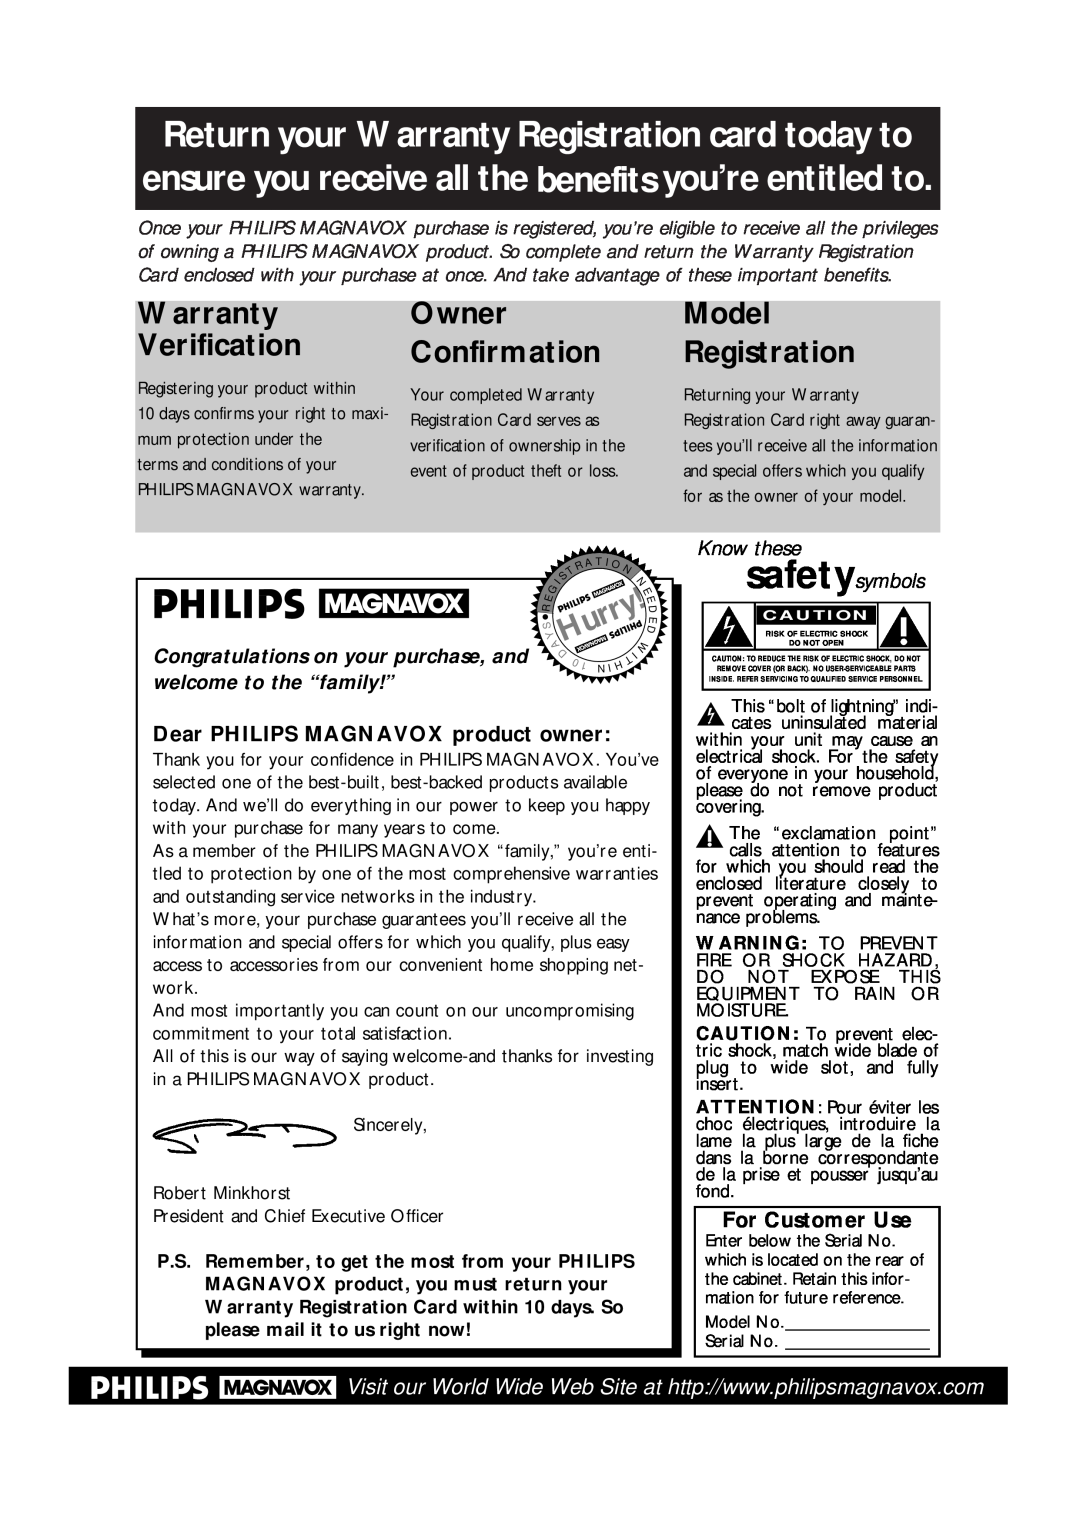 Philips VPA115BL Dear PHILIPS MAGNAVOX product owner, For Customer Use, Warranty Verification, Model Registration, AHurry 